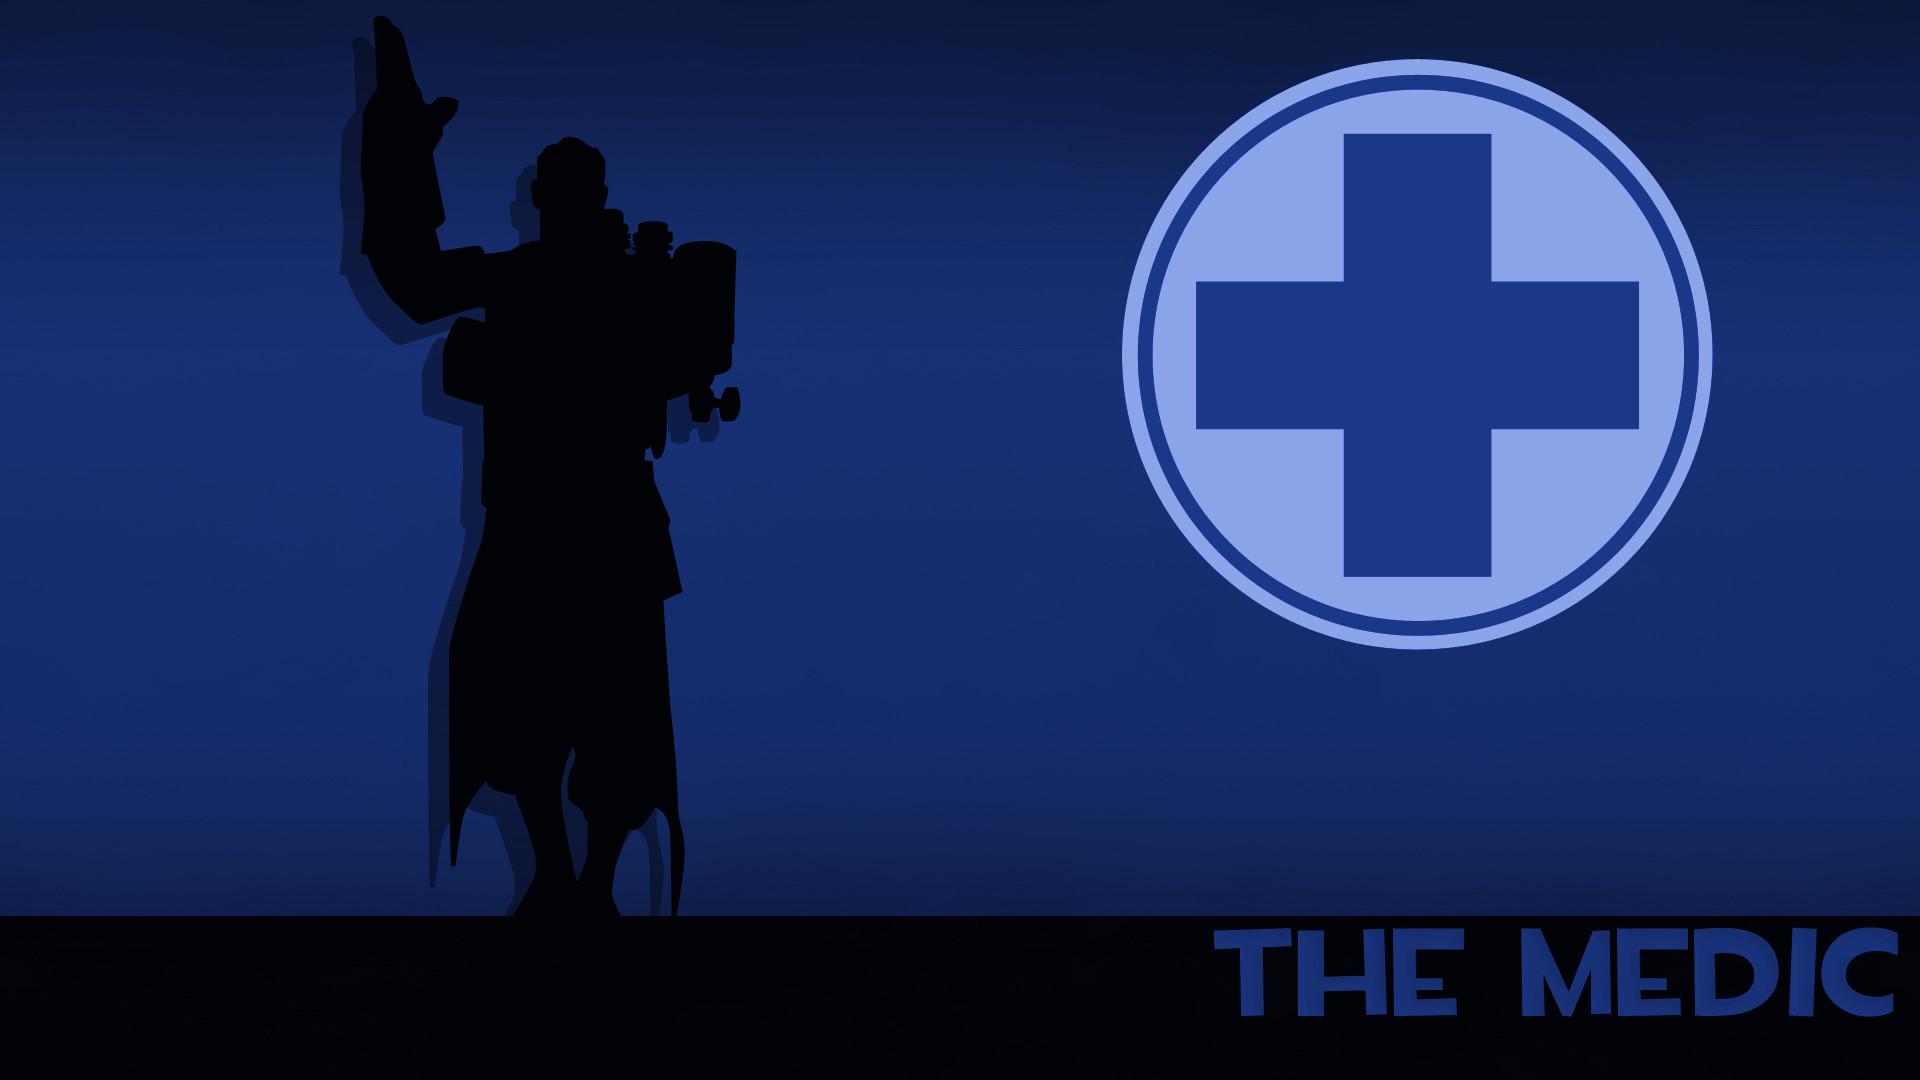 There aren't enough BLU Medic wallpaper out there, so I recolored